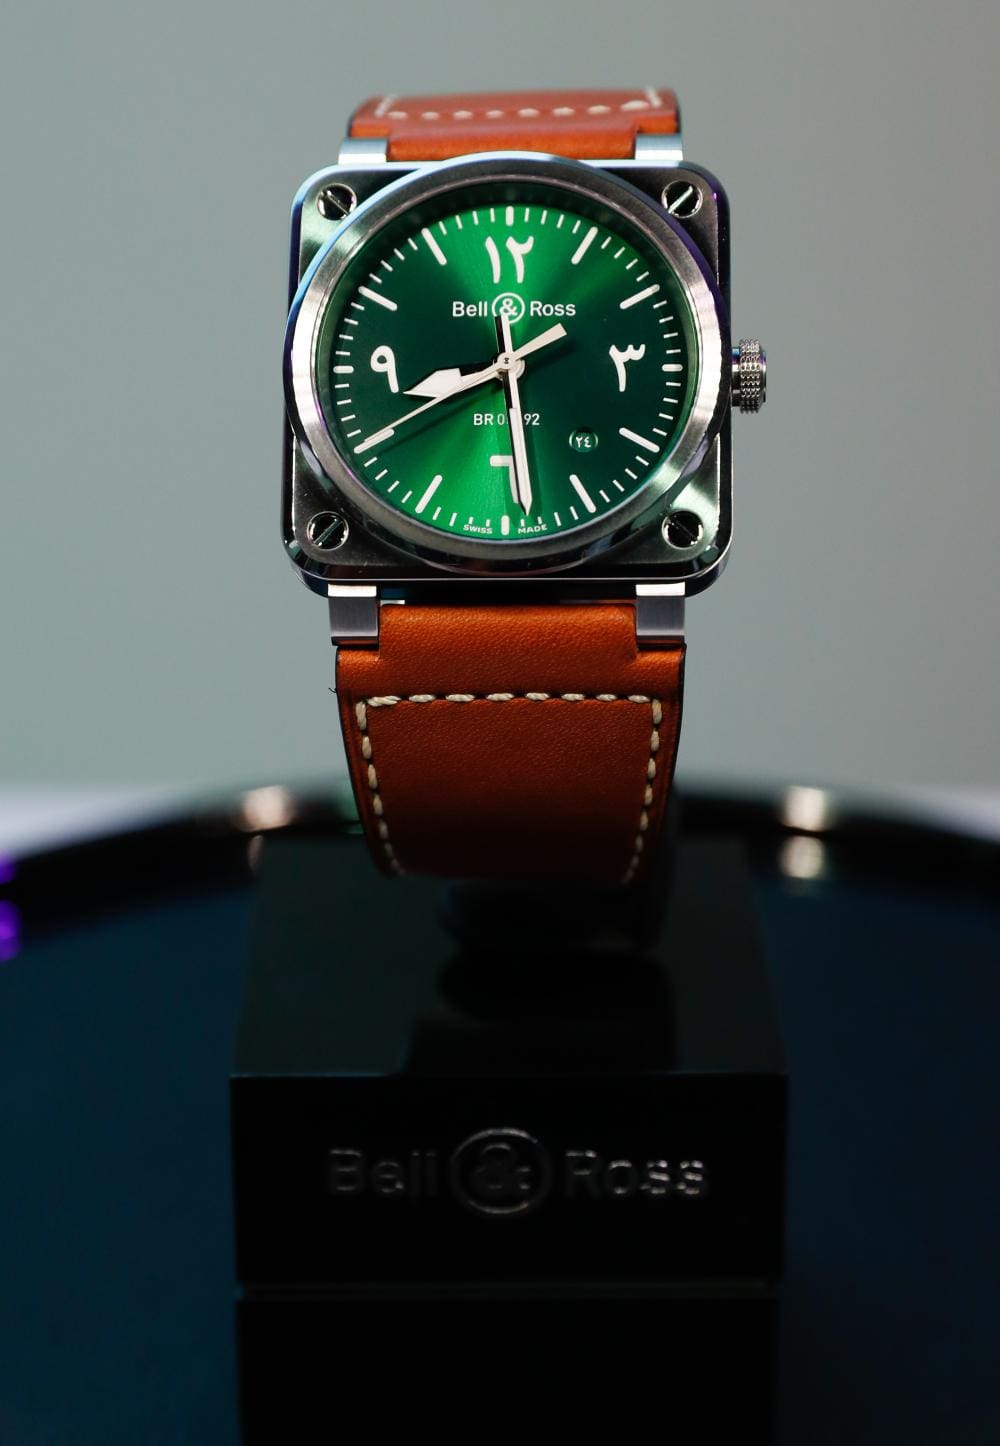 “Watch & Act!” Auction Item – Lot 17: A gorgeous green Middle Eastern Limited Edition Bell & Ross